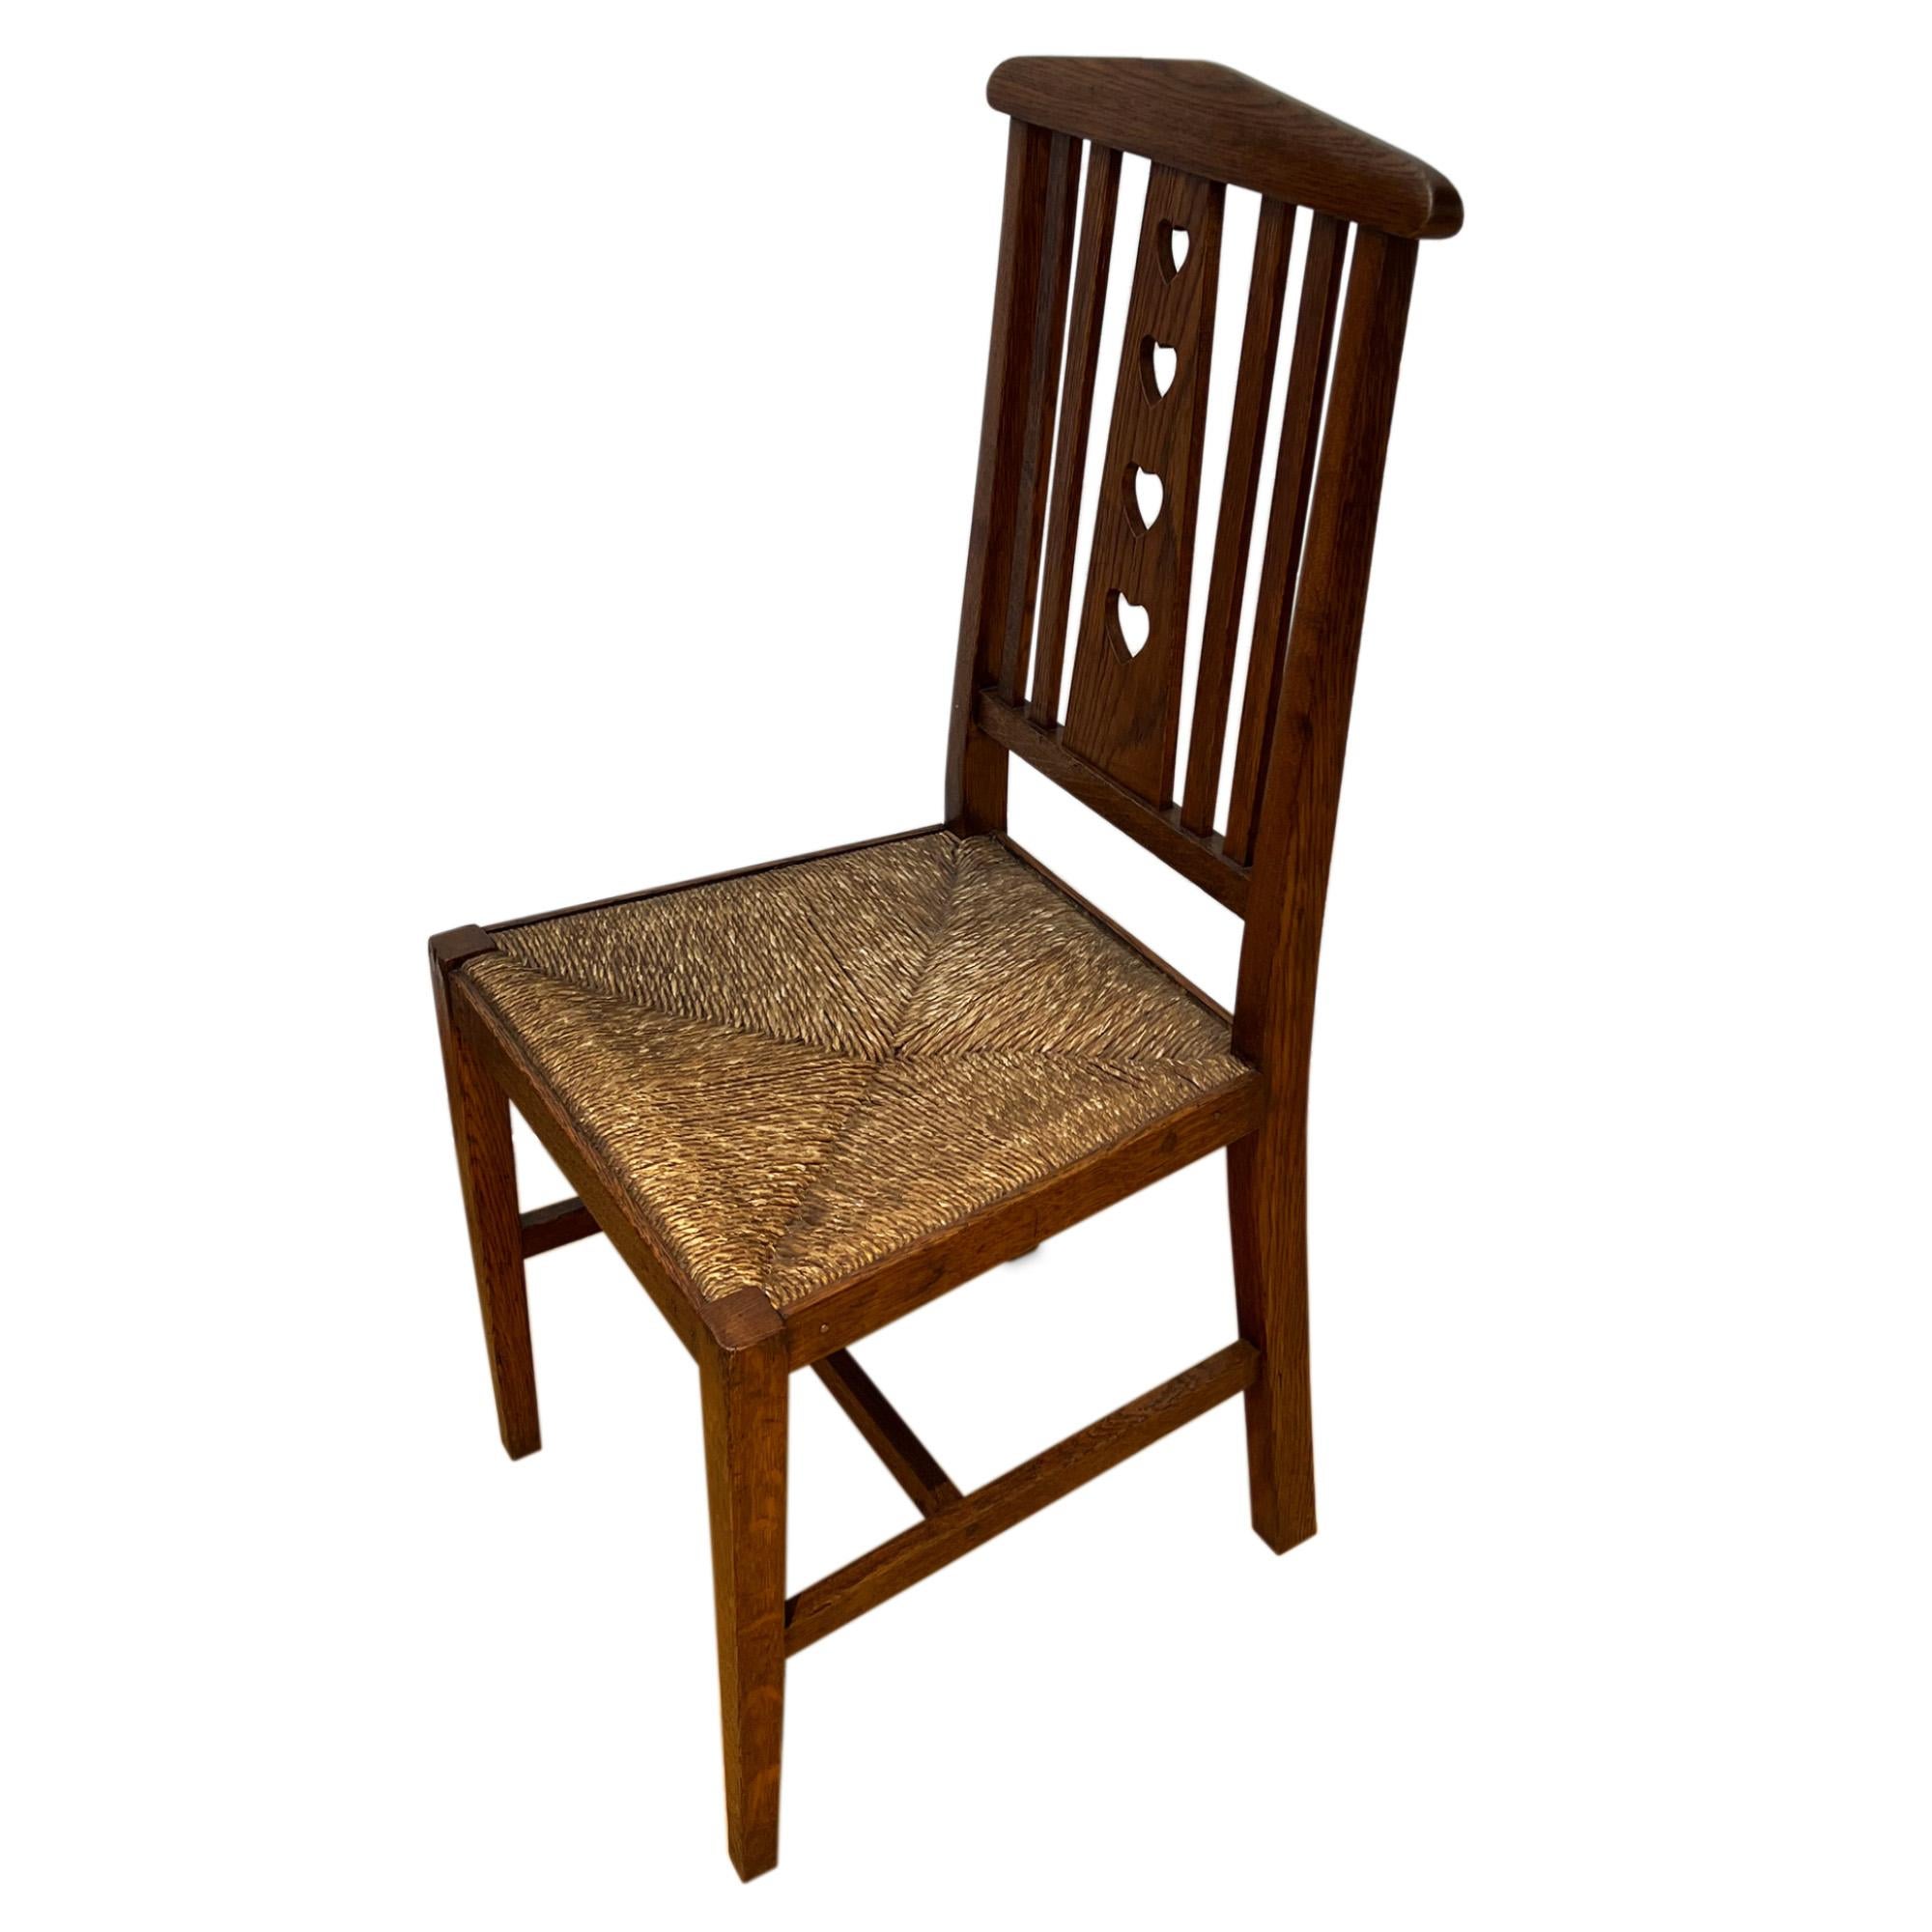 This is a set of four hall or dining chairs, which can also be sold in pairs. Price shown is for a set of two. 

Made from oak with a rush seat and a charming heart cut out detail. A great example of British Arts and Craft design. 

Seat height